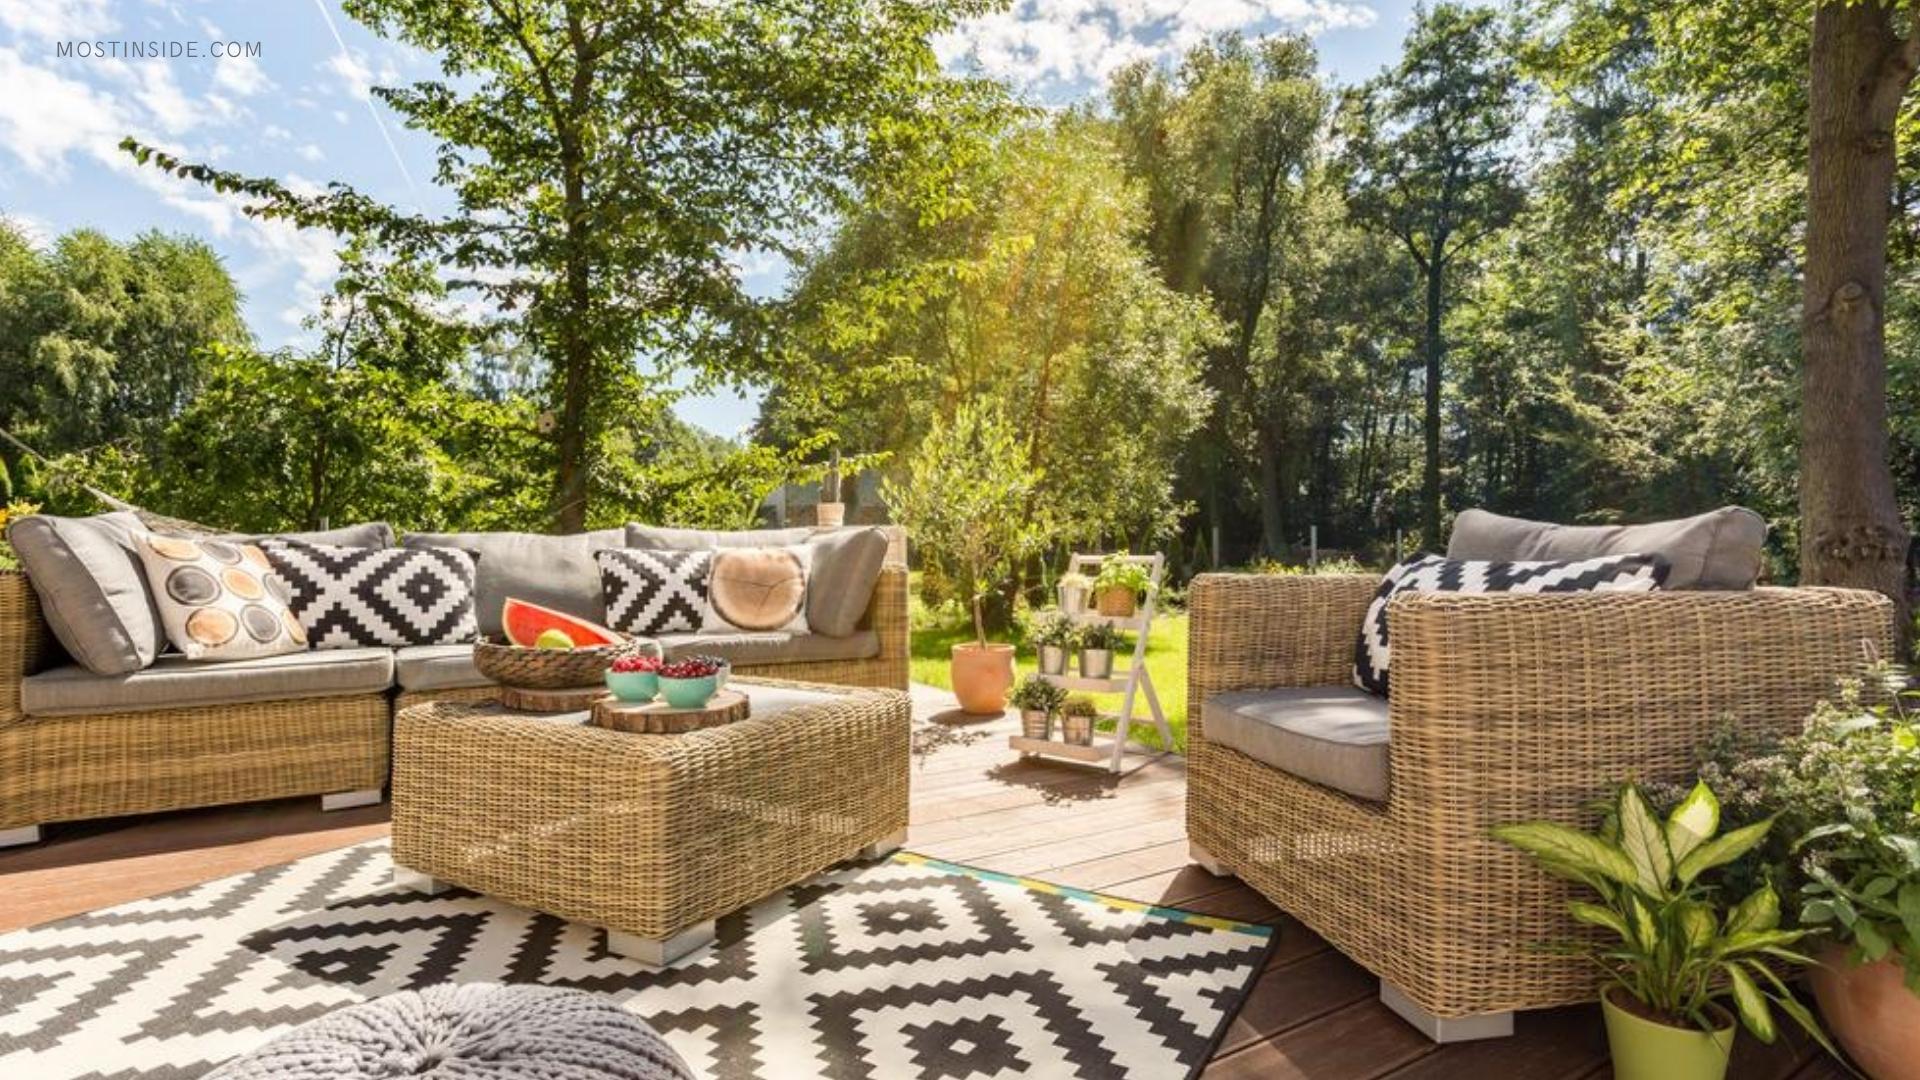 How to Keep Your Outdoor Living Space as Clean as Possible